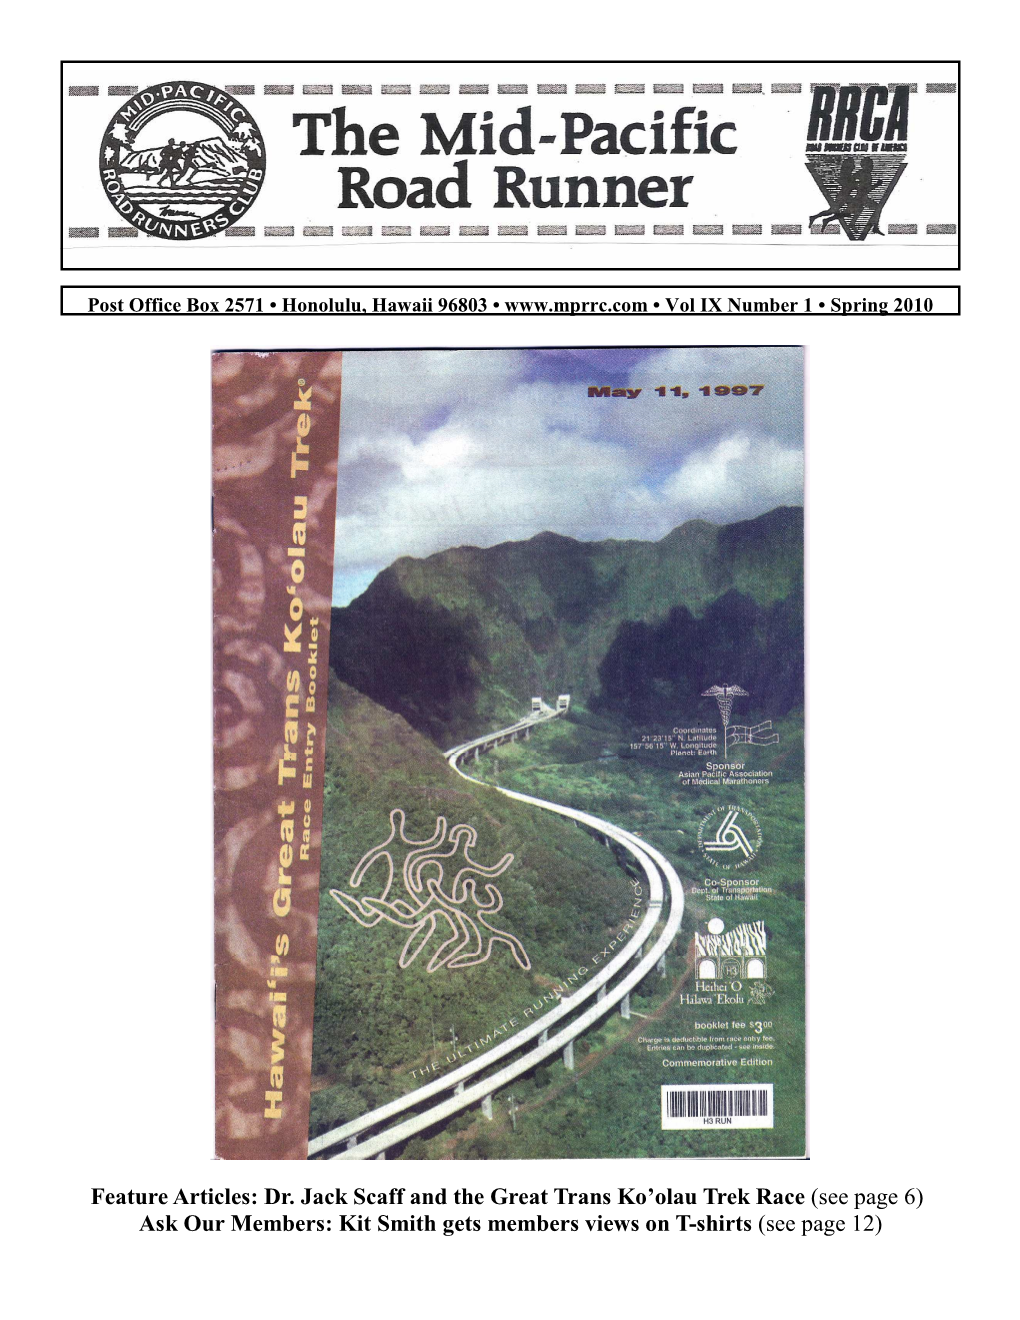 Dr. Jack Scaff and the Great Trans Ko'olau Trek Race (See Page 6)